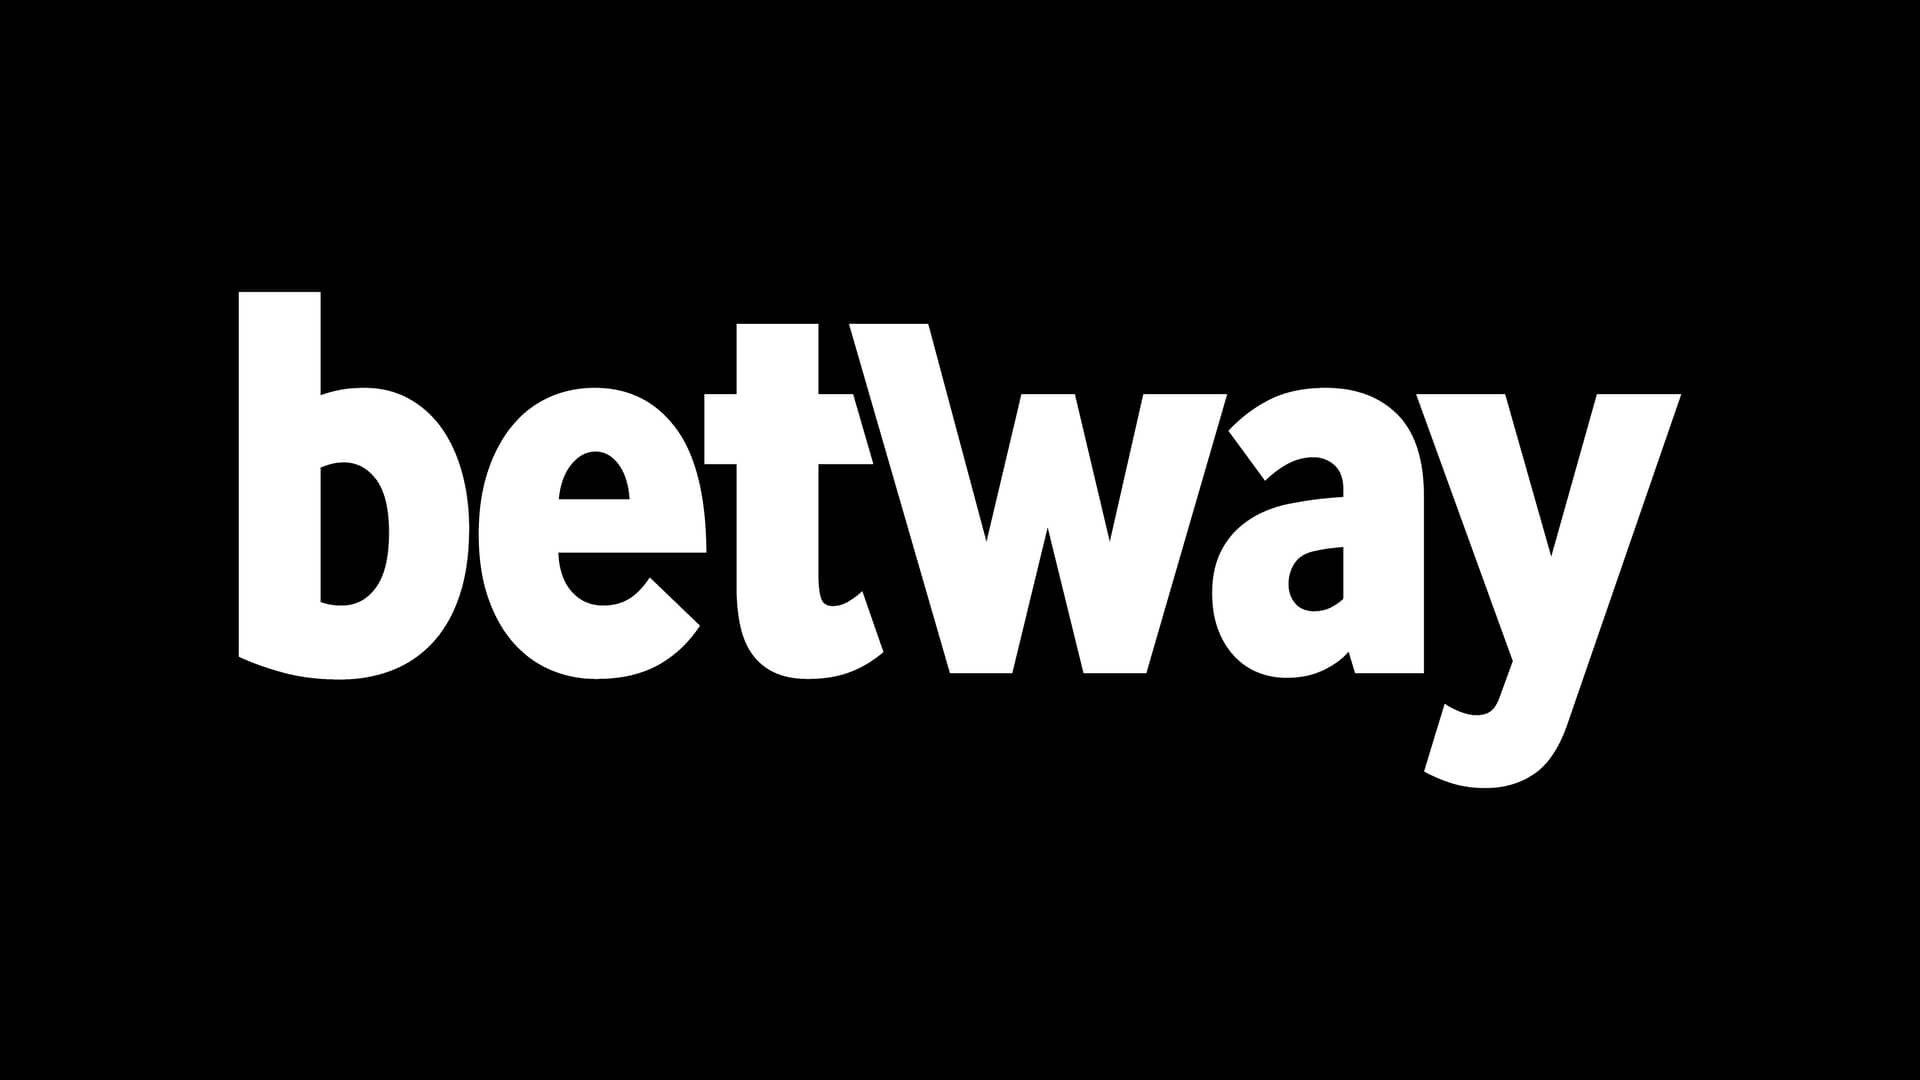 Betway-NBA-Online-Betting-Companies-in-the-World-